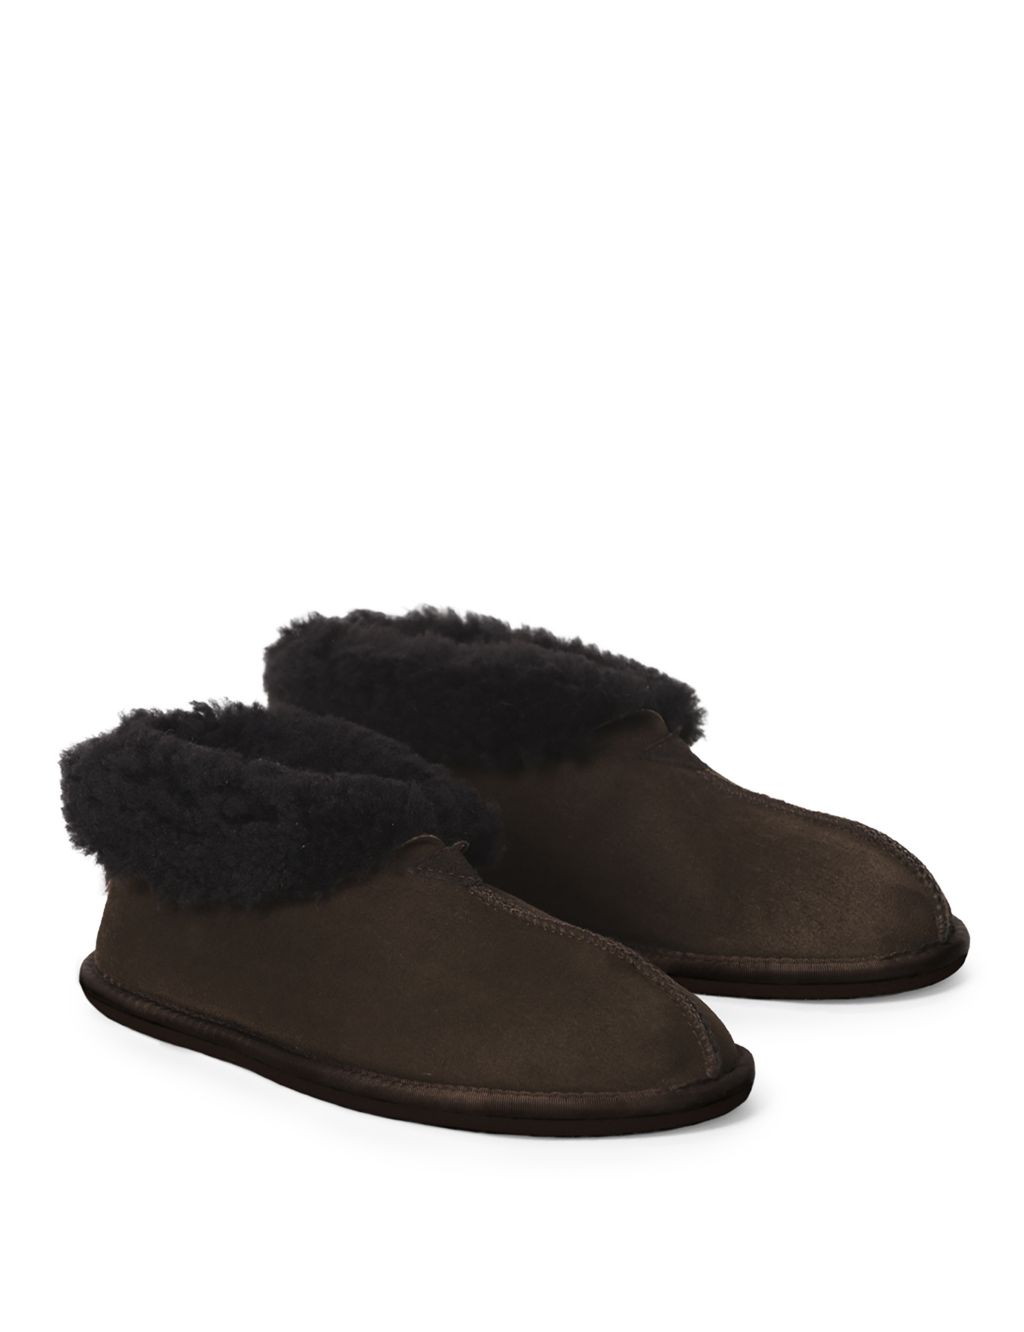 Suede Slipper Boots